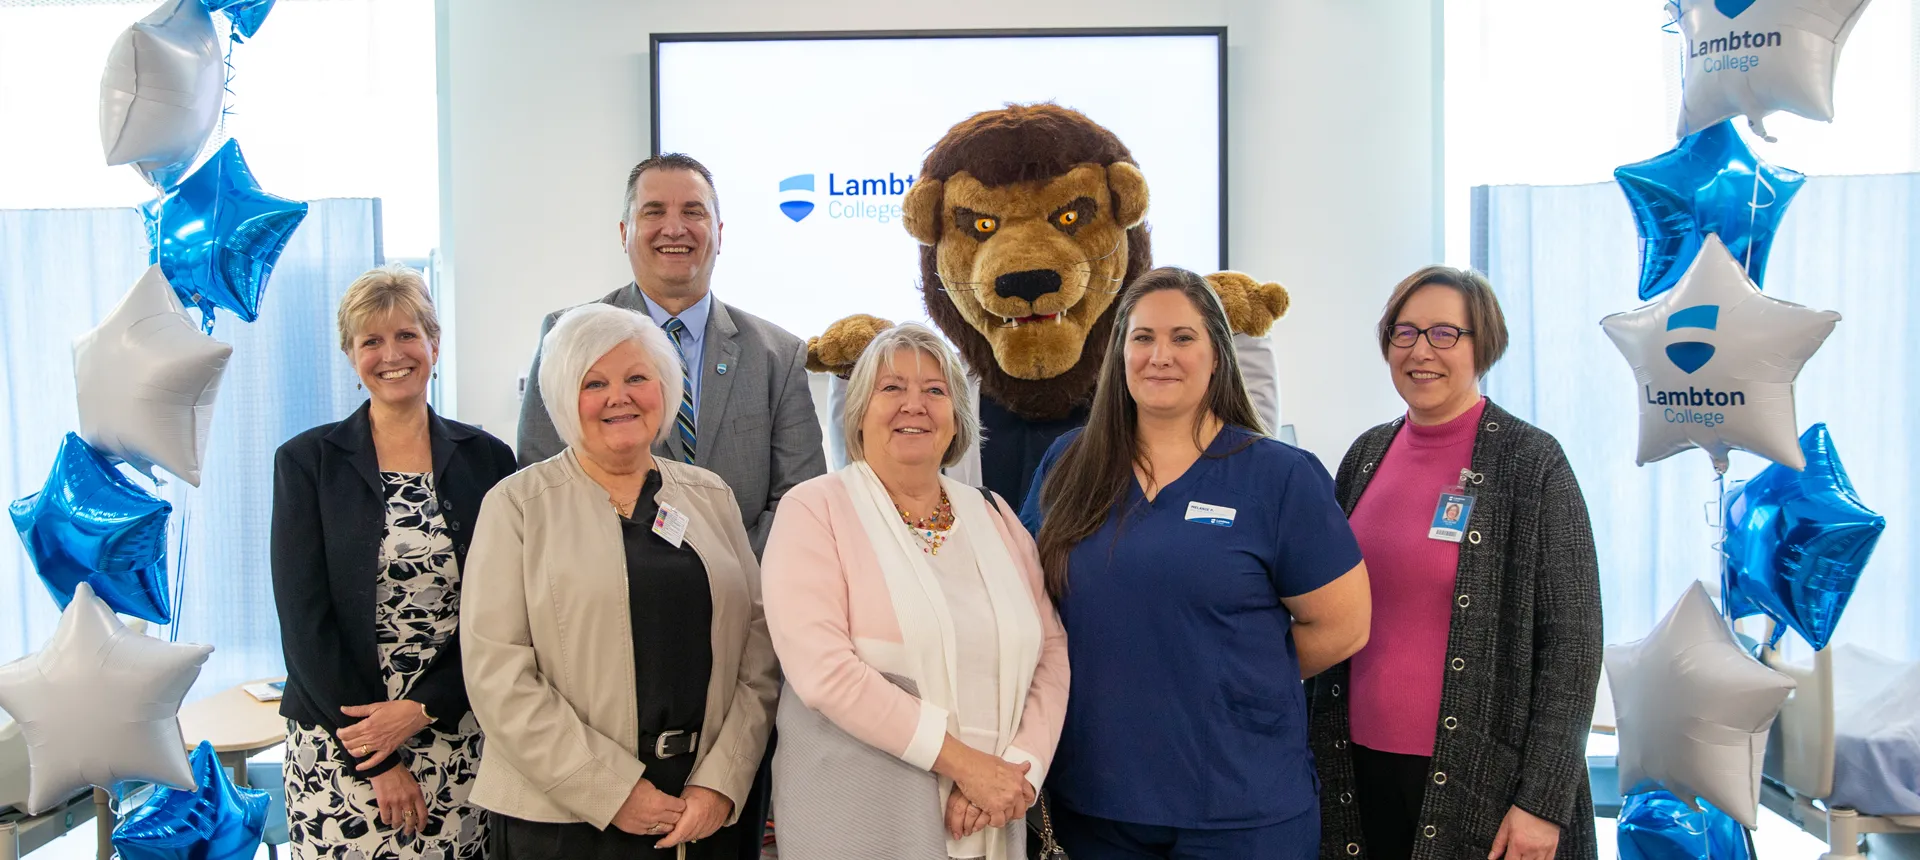 Lambton College Faculty, Staff, Students and mascot Pounce smile together